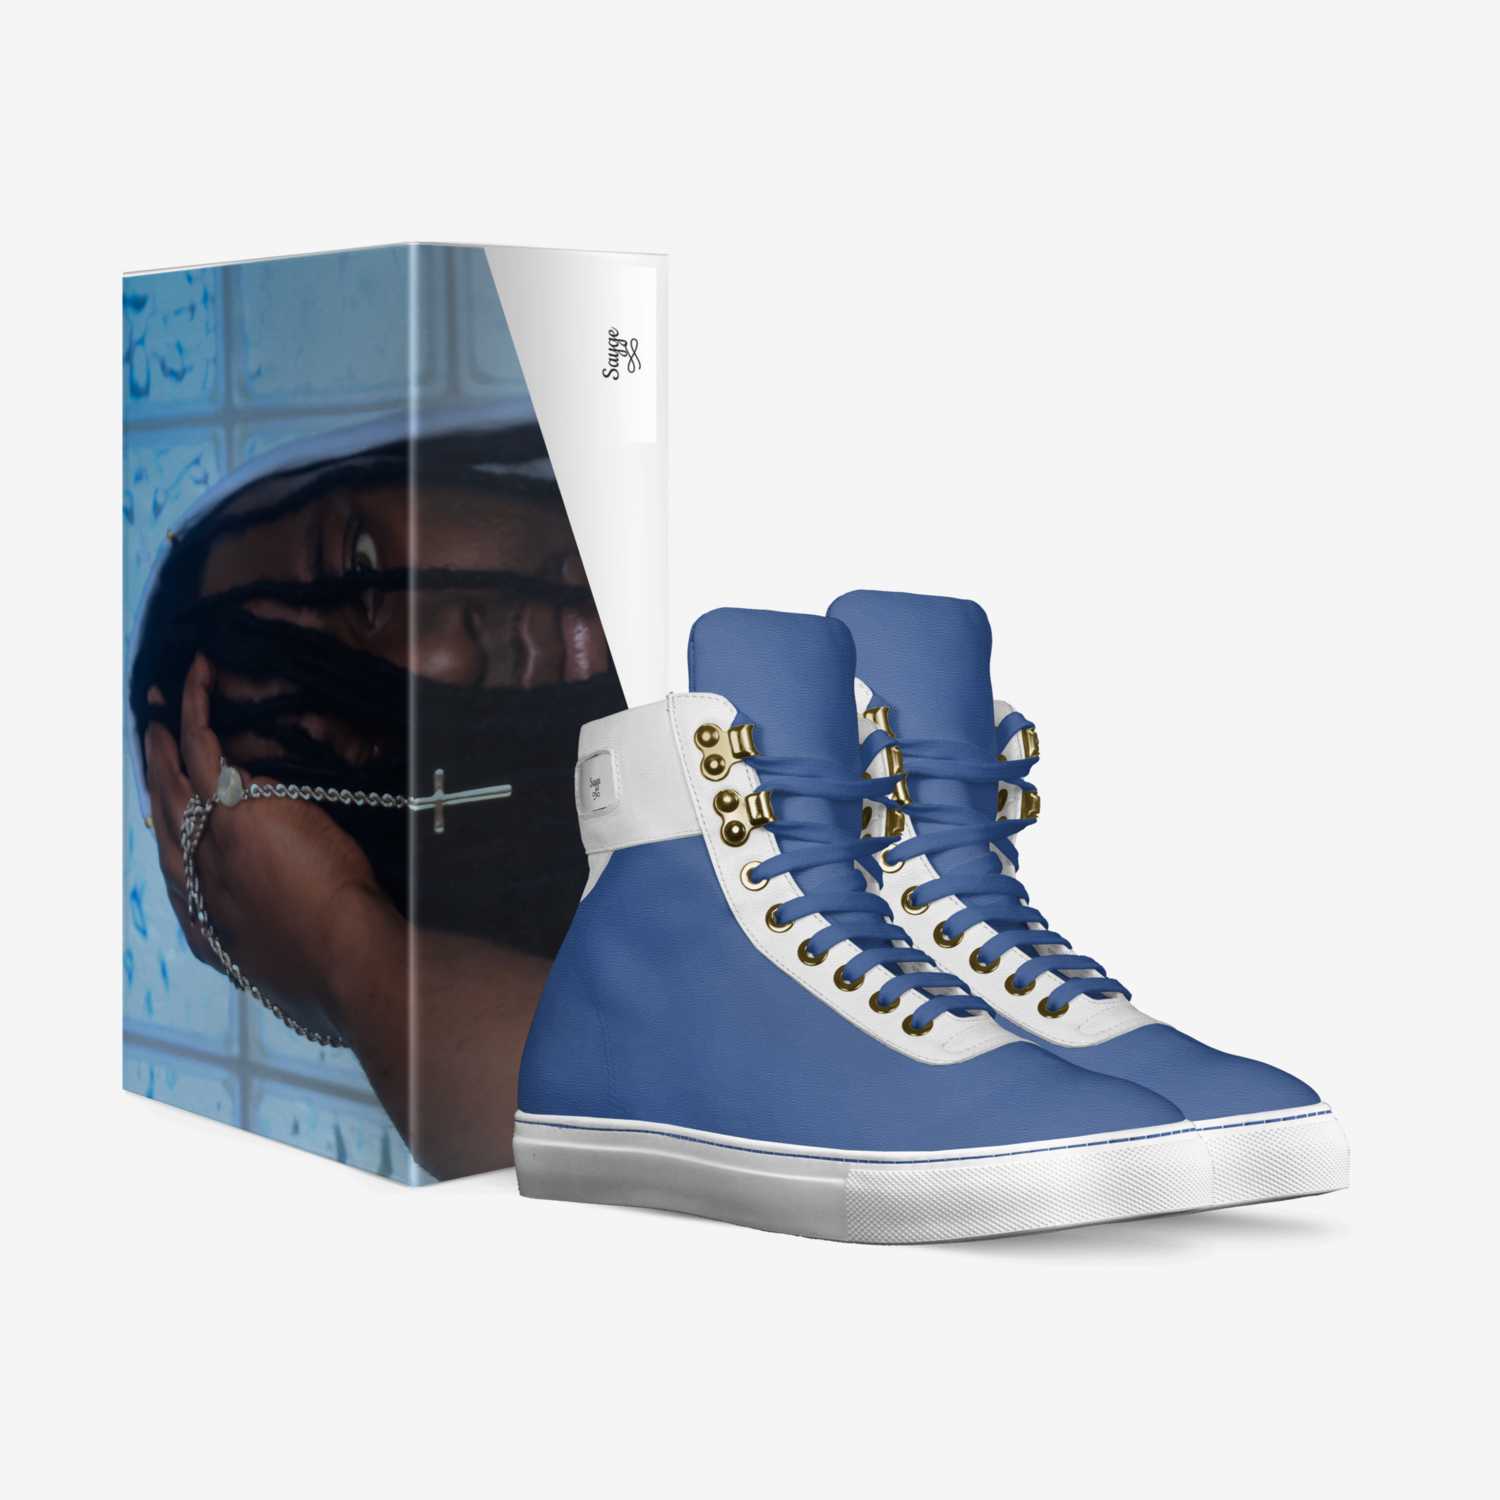 Sayge custom made in Italy shoes by Donnell Isaac | Box view